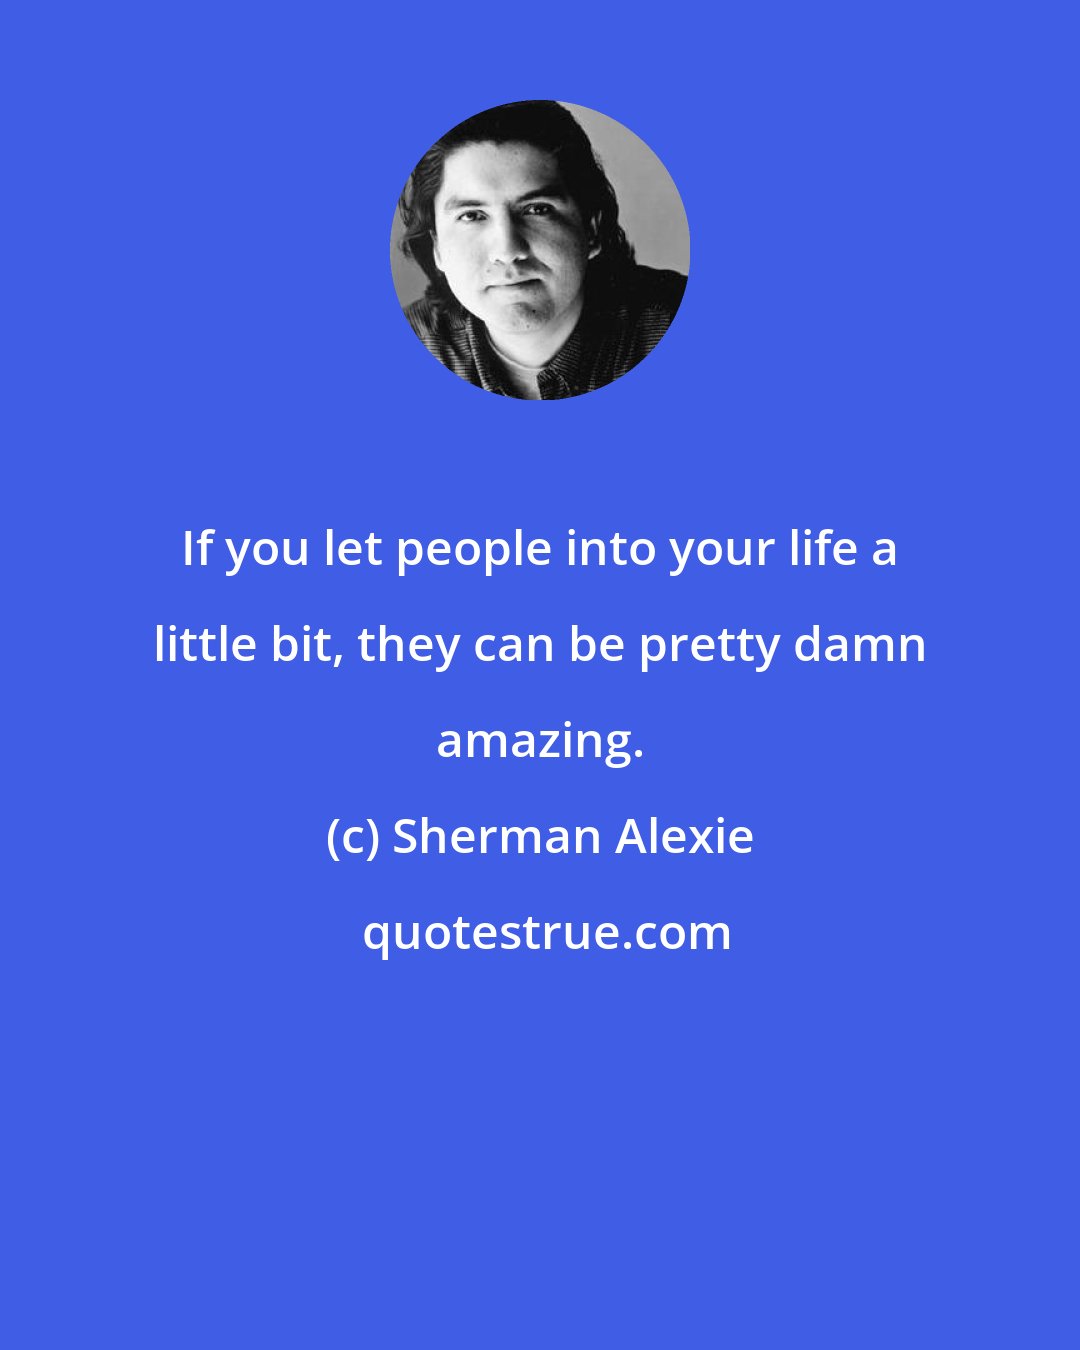 Sherman Alexie: If you let people into your life a little bit, they can be pretty damn amazing.